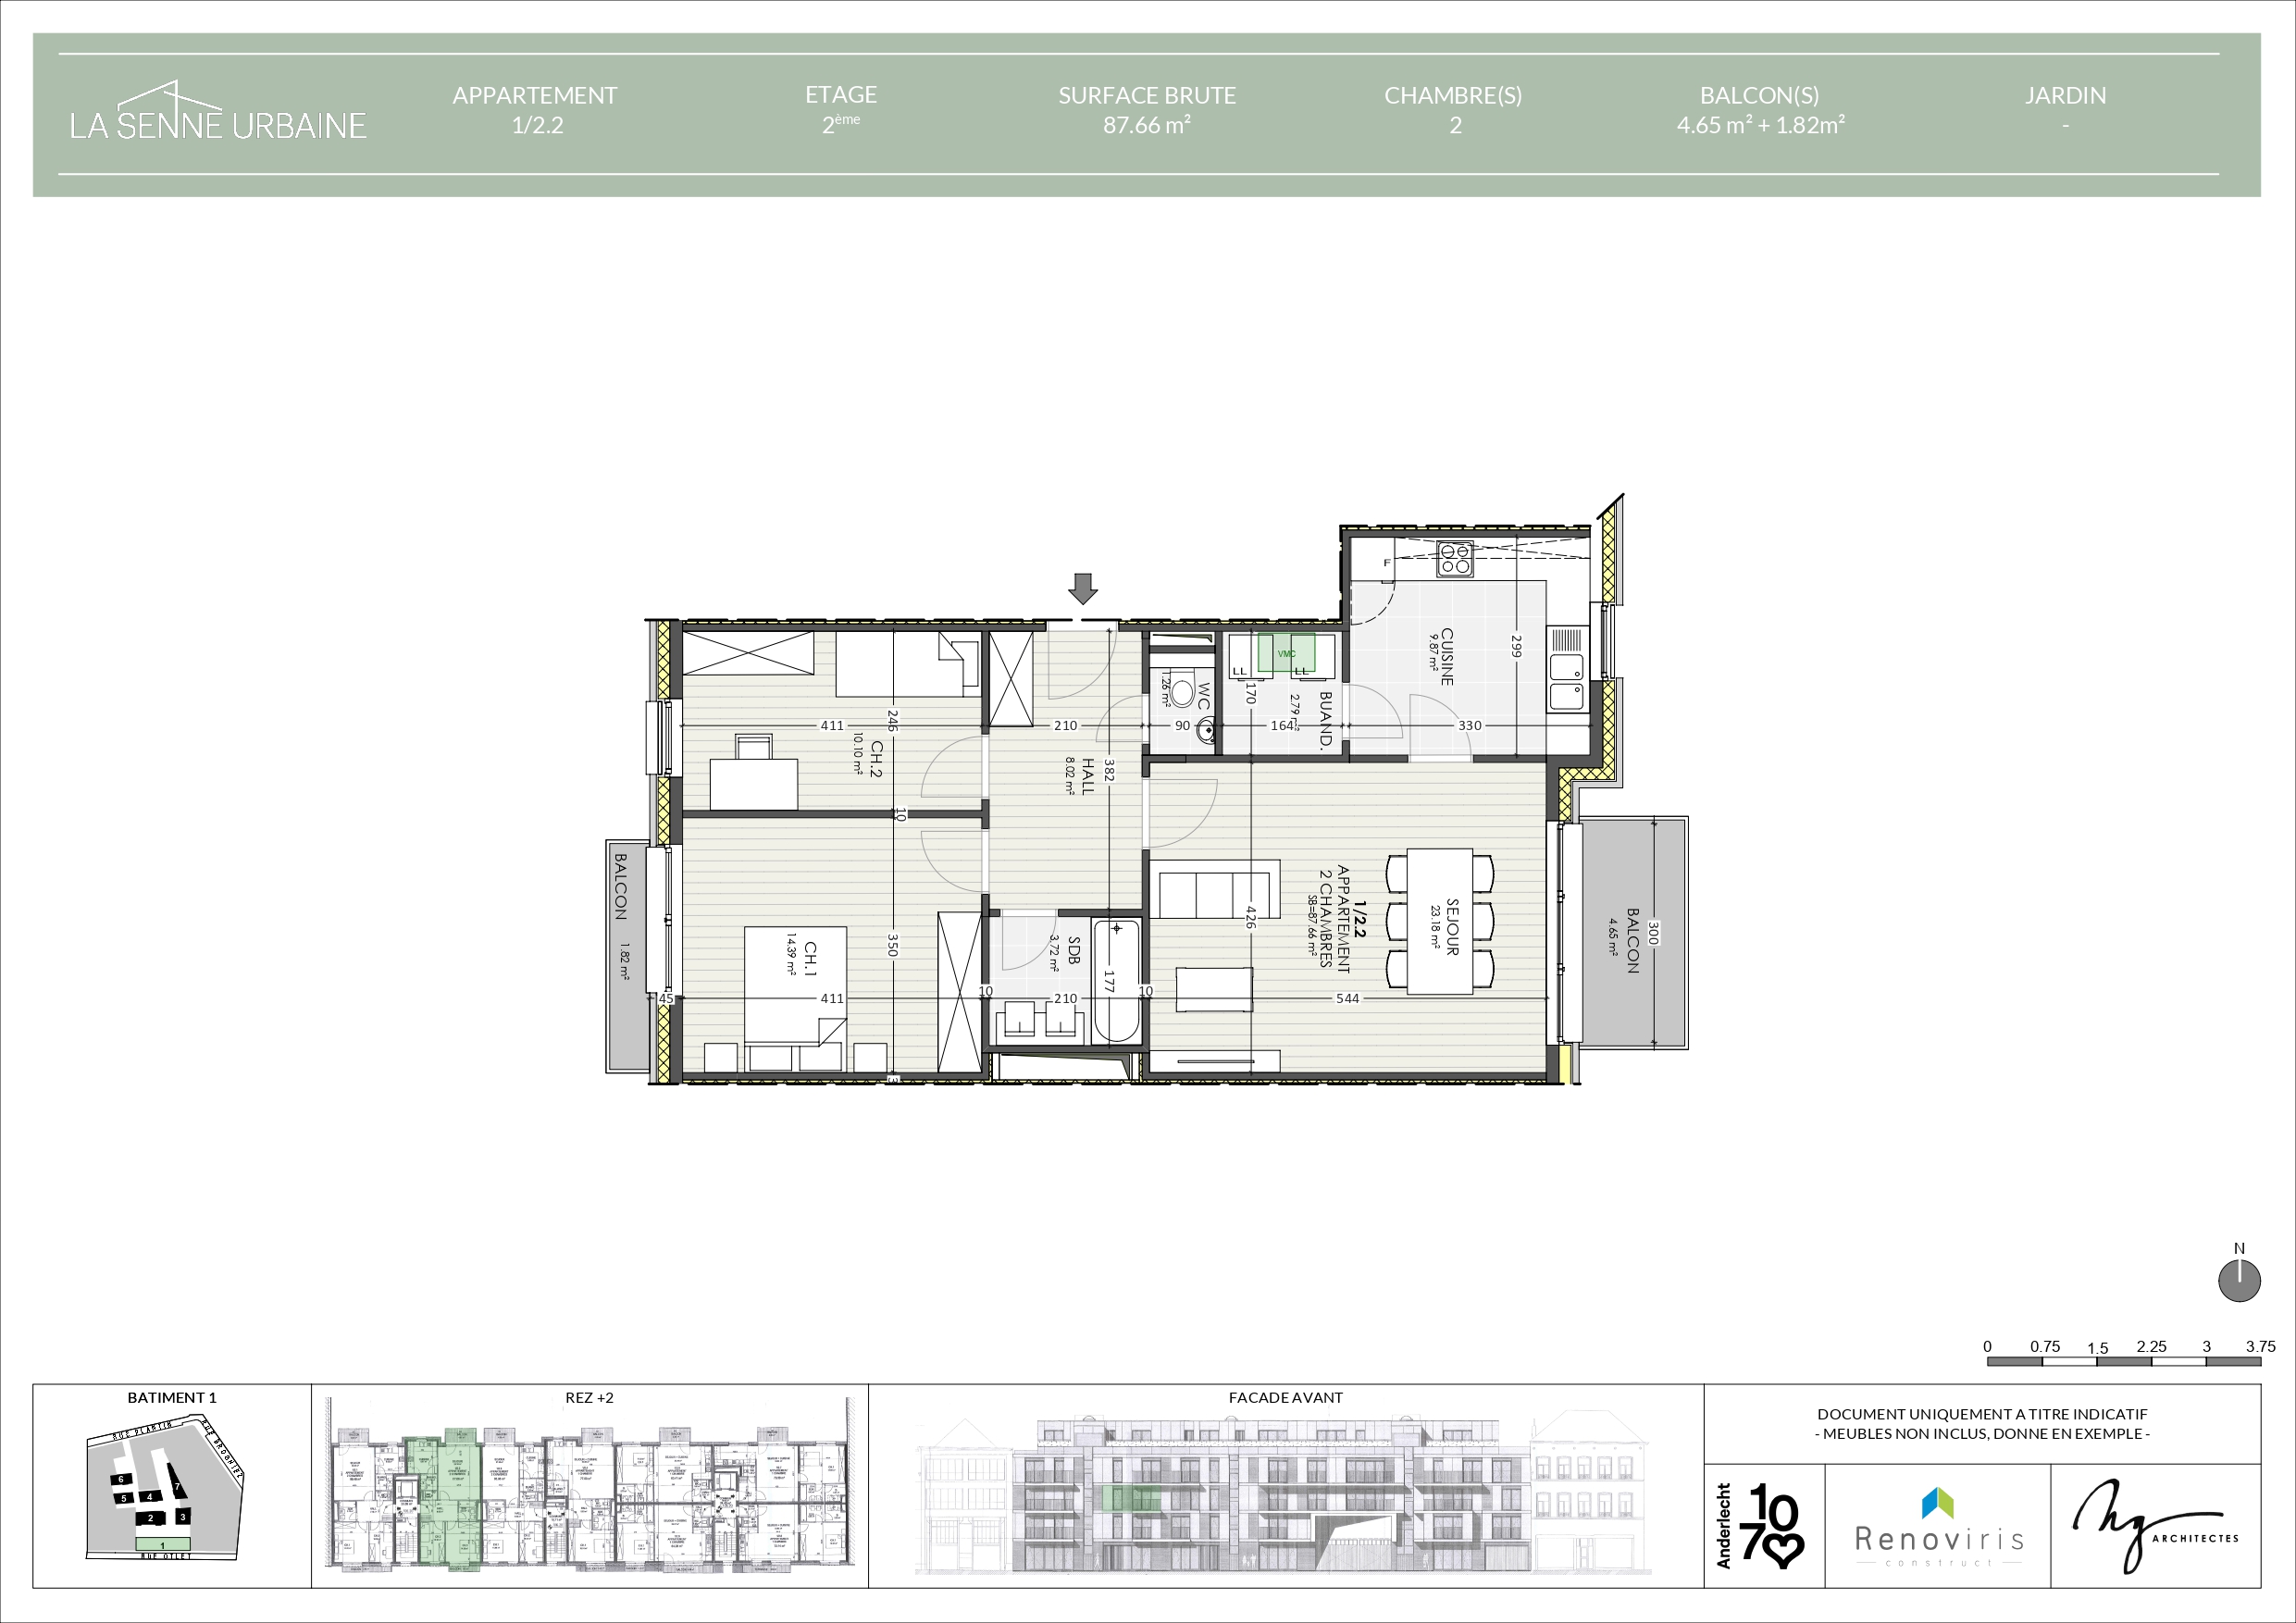 R+2 - Appartement 1_2.2_22_page-0001